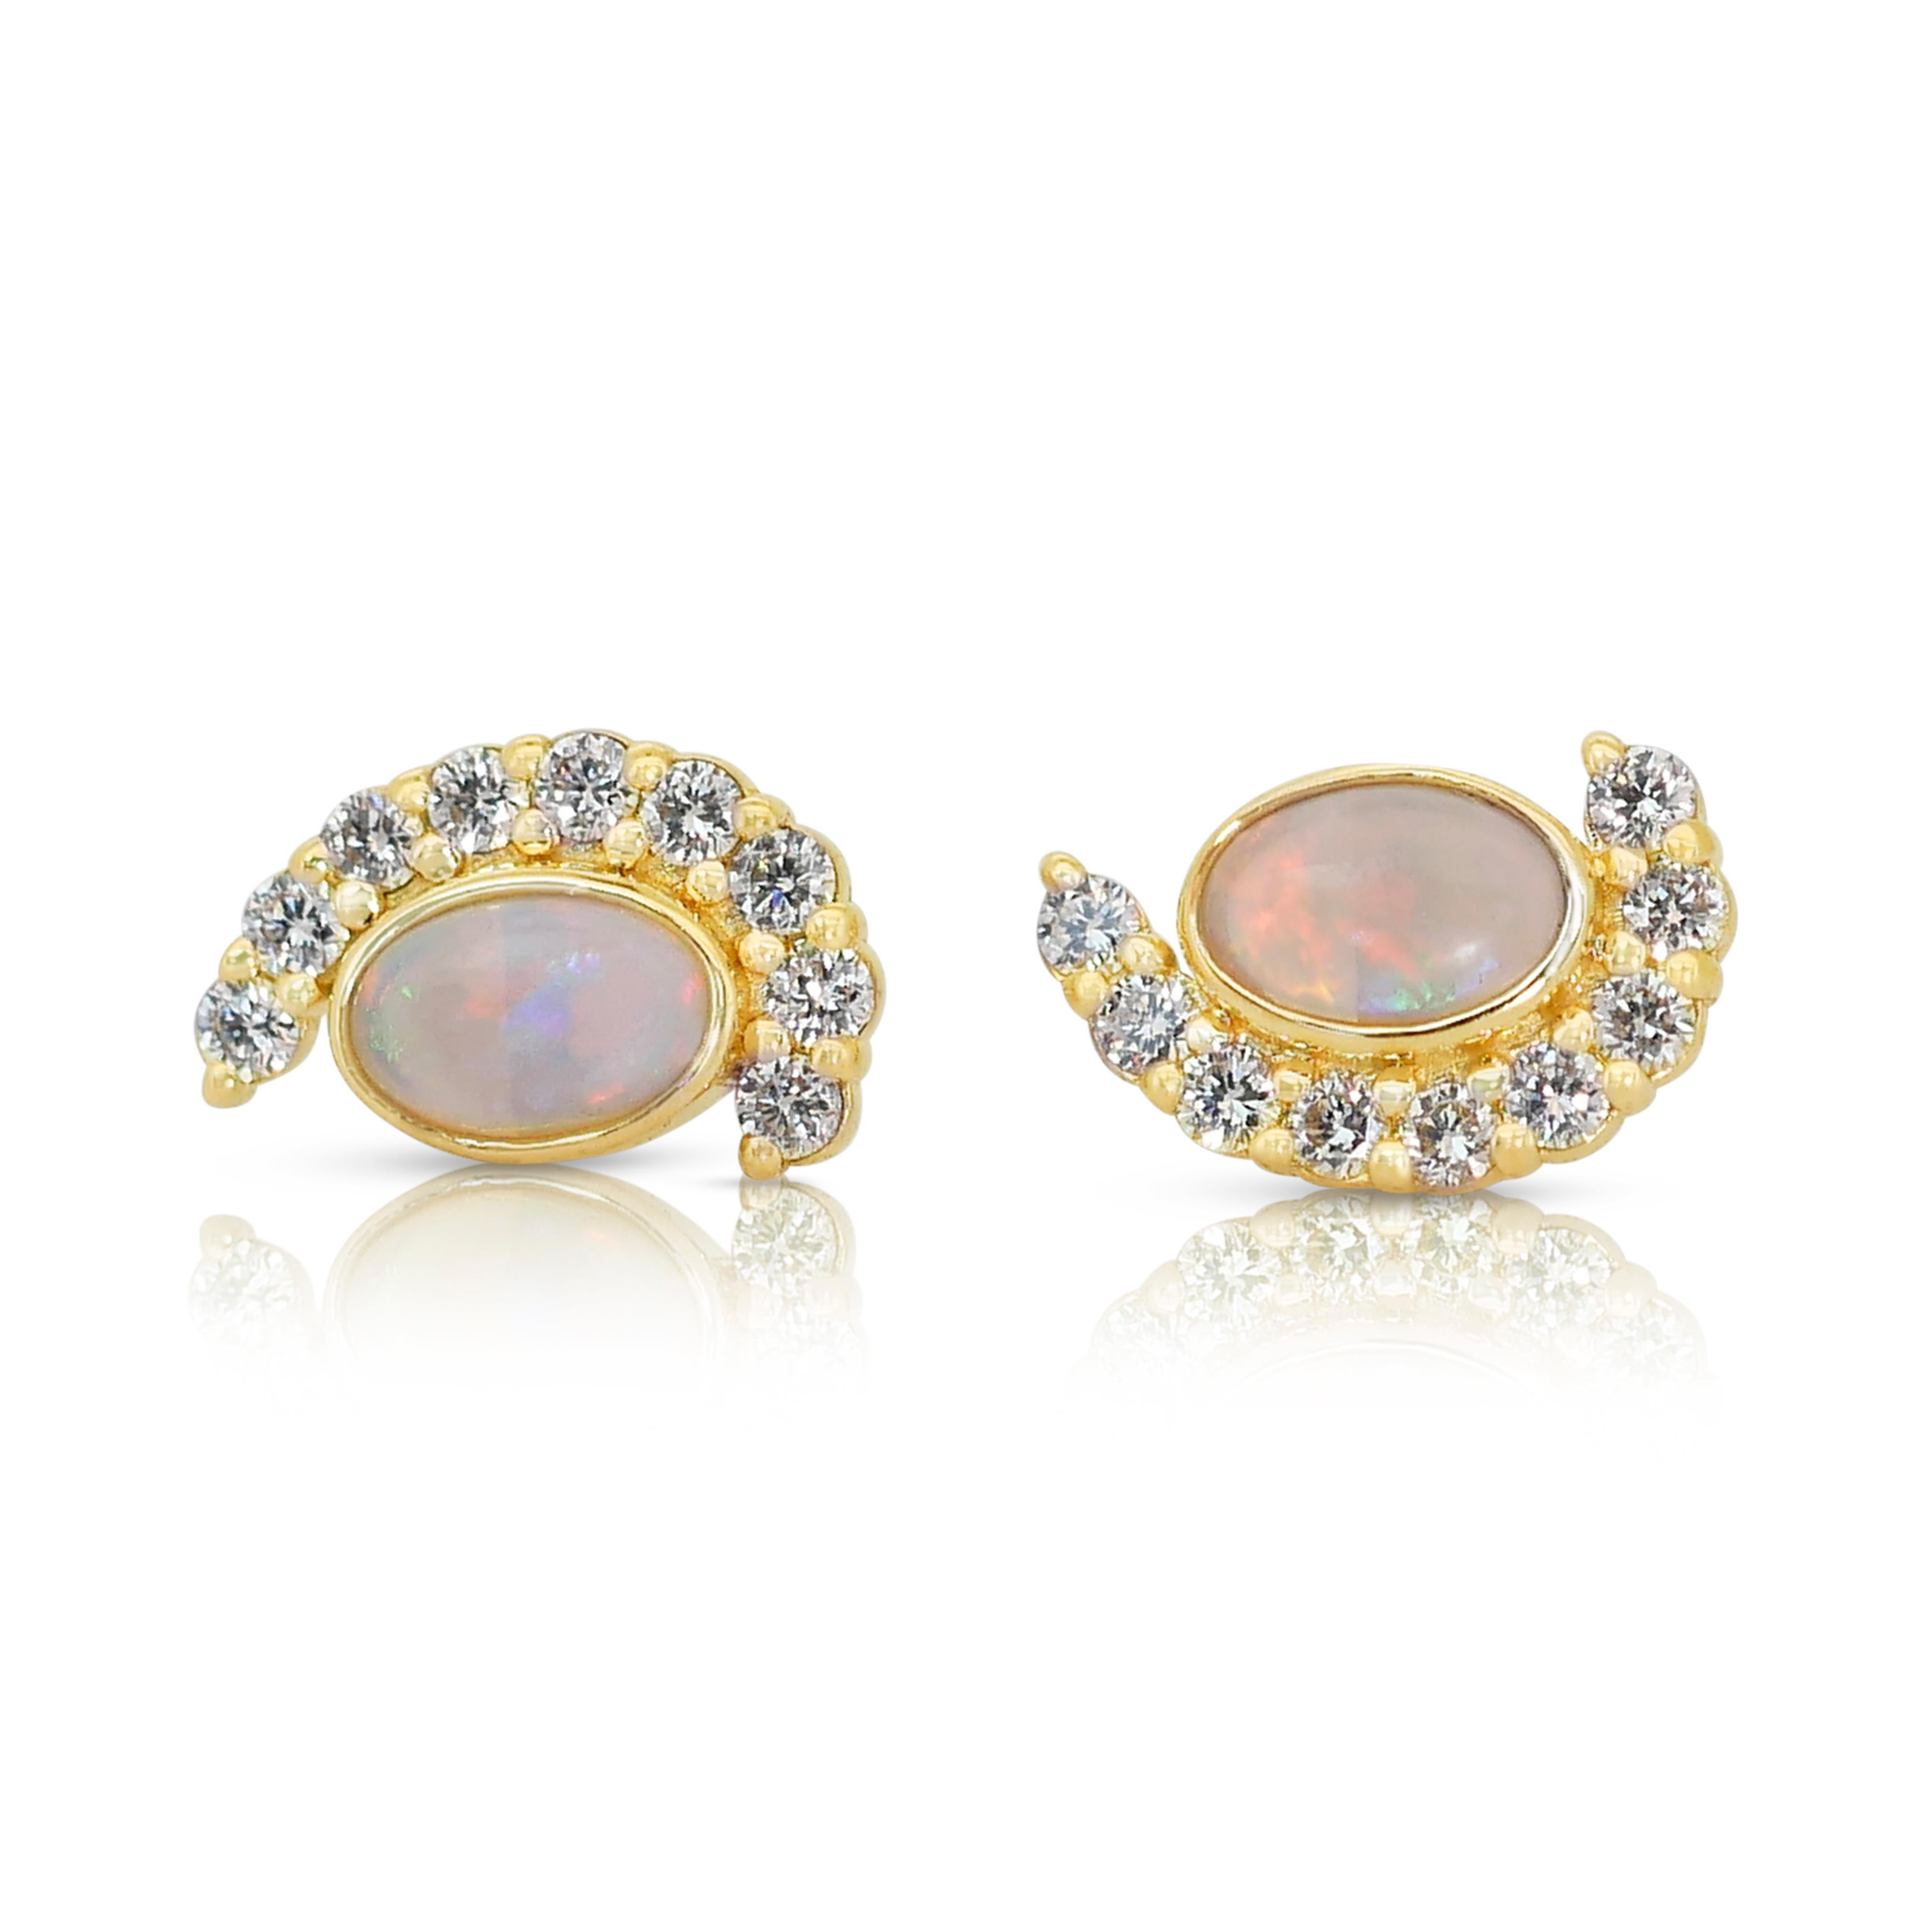  Lovely 14k Yellow Gold Opal and Diamond Halo Stud Earrings w/1.15 ct - IGI Cert For Sale 3